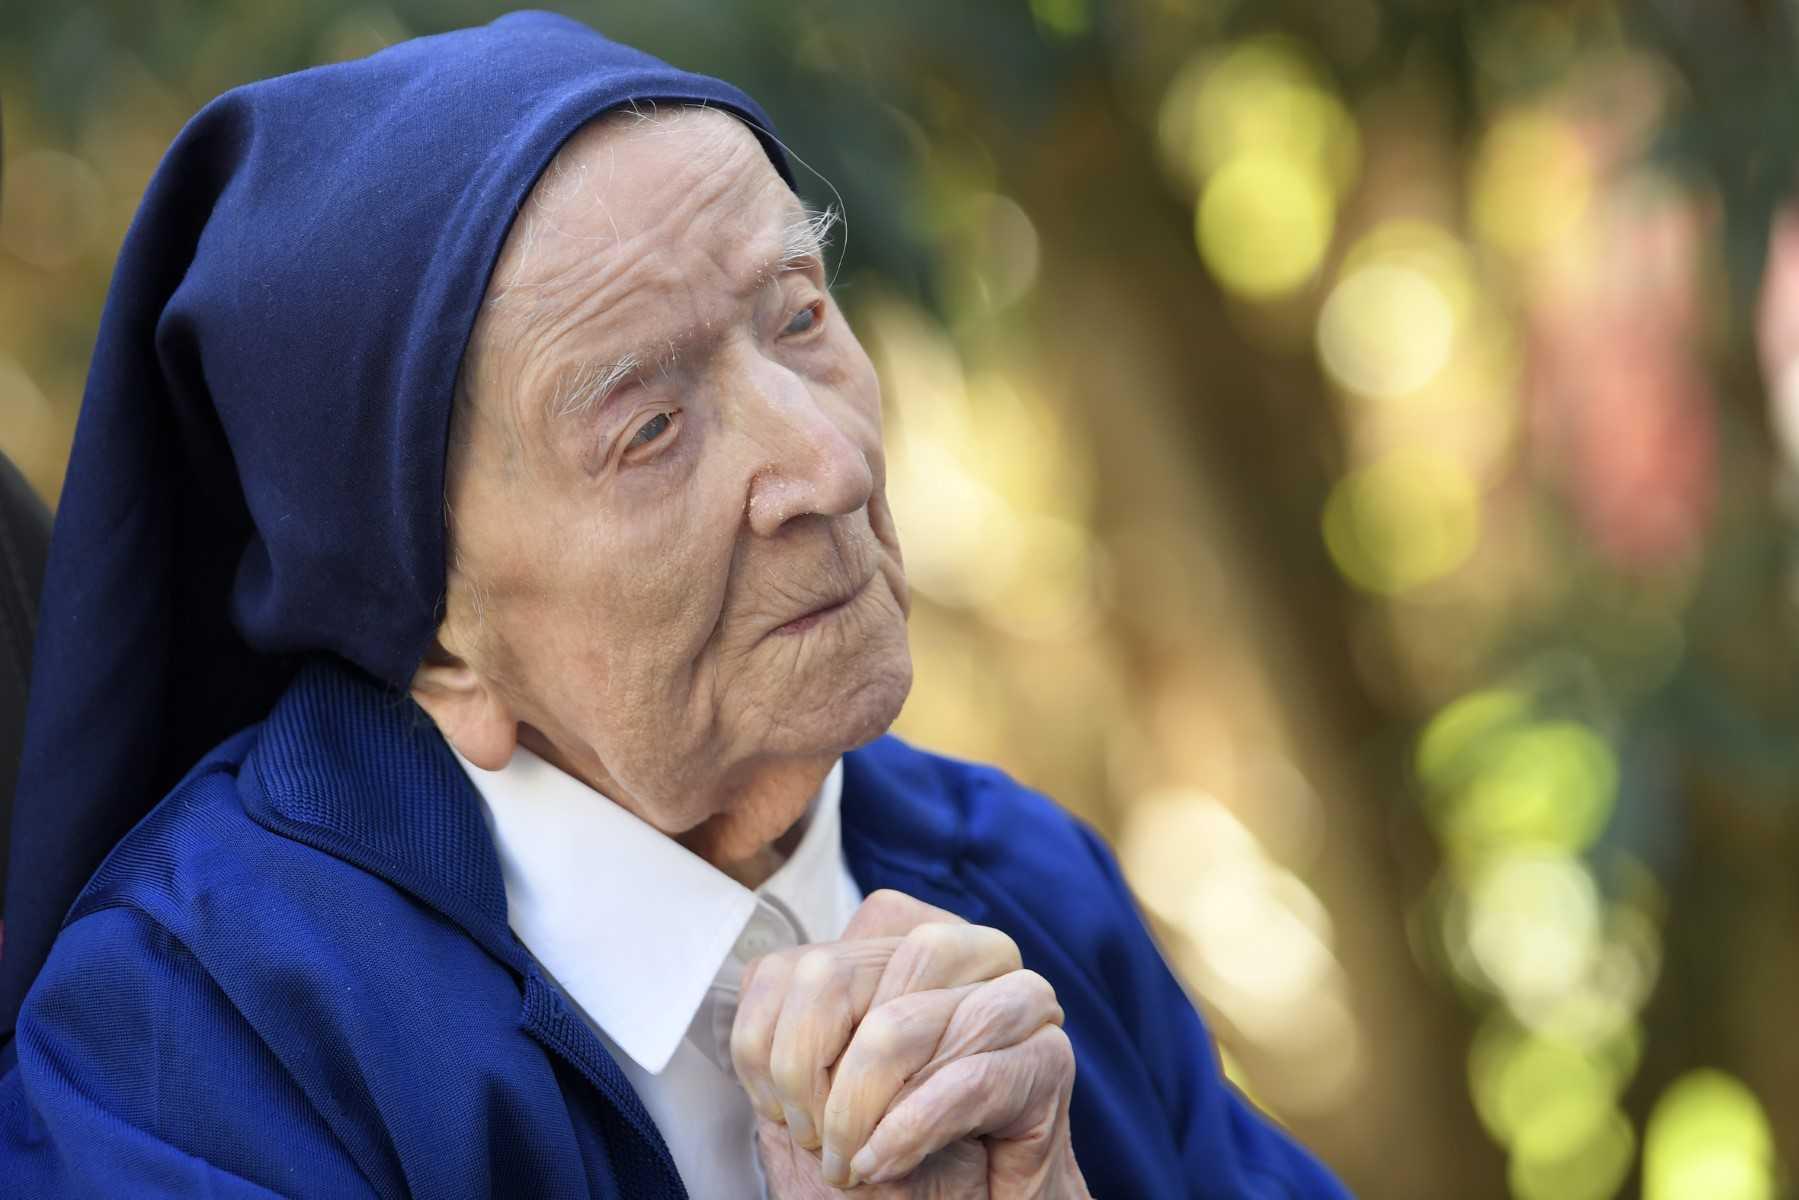 Sister Andre or Lucile Randon at a nursing home in Toulon, southern France, on Feb 10, 2021. Photo: AFP